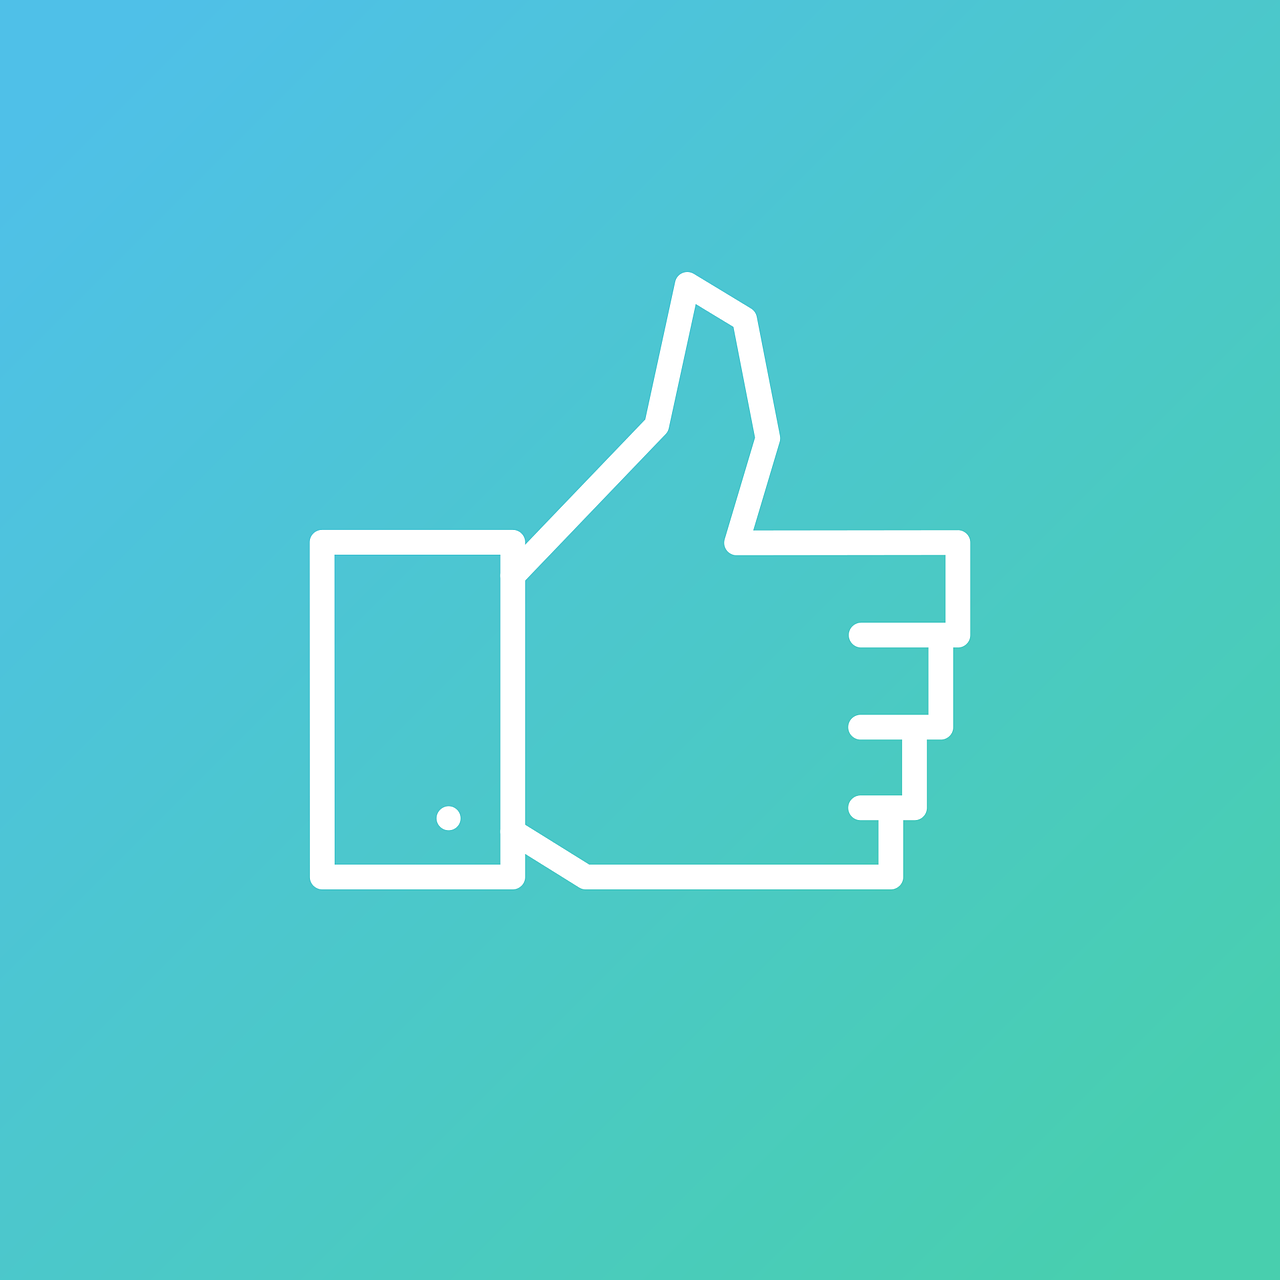 An outline of a thumbs up on a blue background